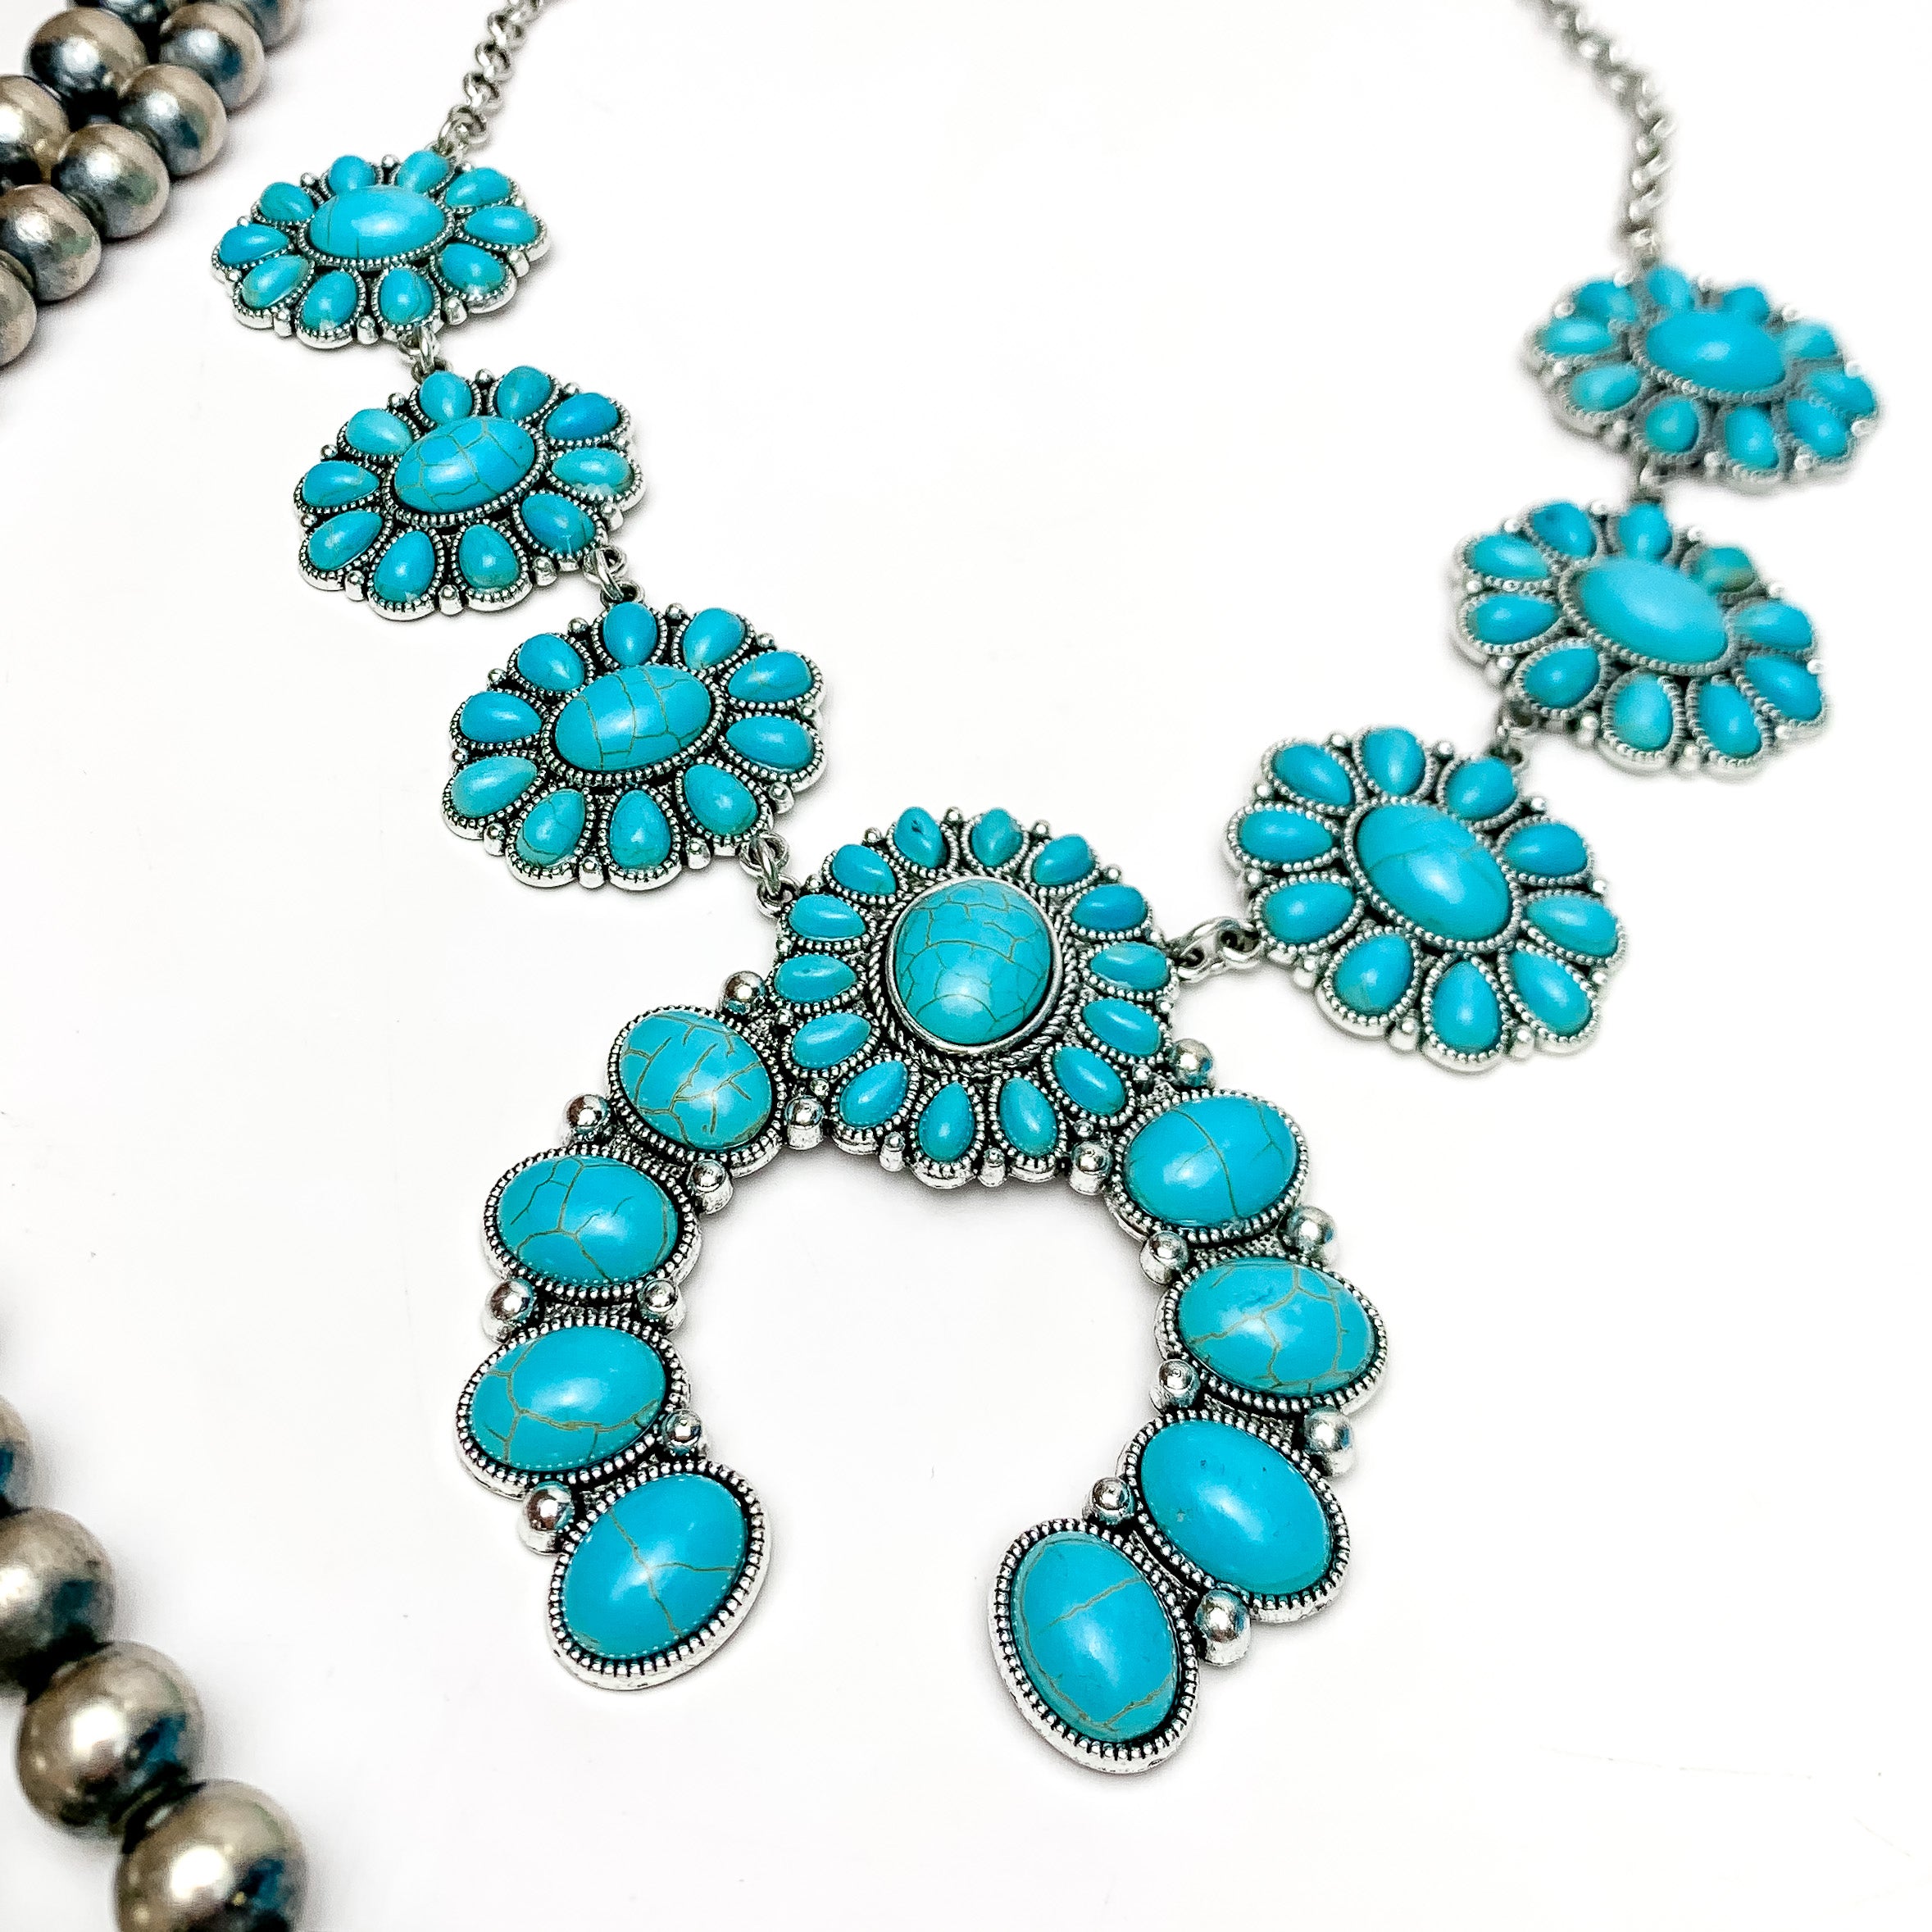 The Western Way Squash Blossom Necklace in Turquoise Blue - Giddy Up Glamour Boutique